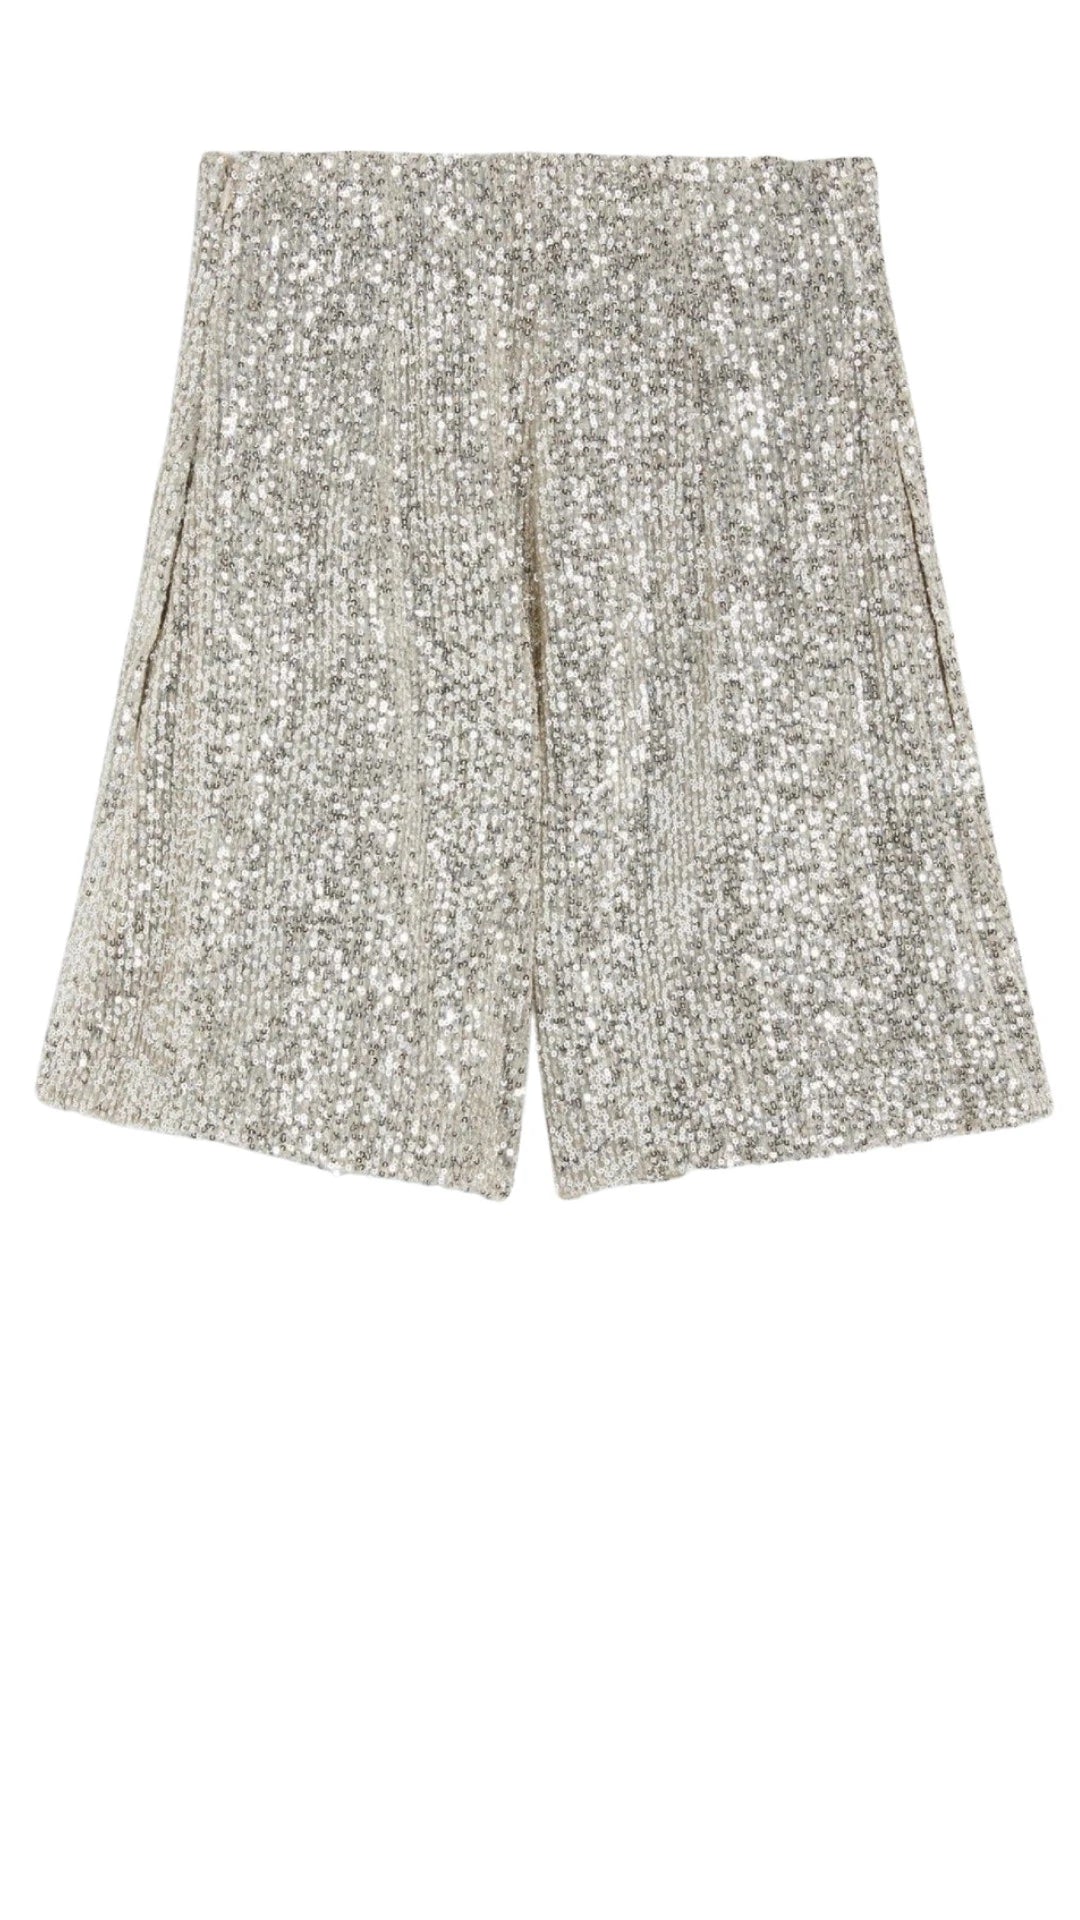 Rochas Paris Fashion High-Waisted Sparkle Shorts in silver sequins. High waisted with a wide leg that lands just above the knee. Product photo of shorts from the back.